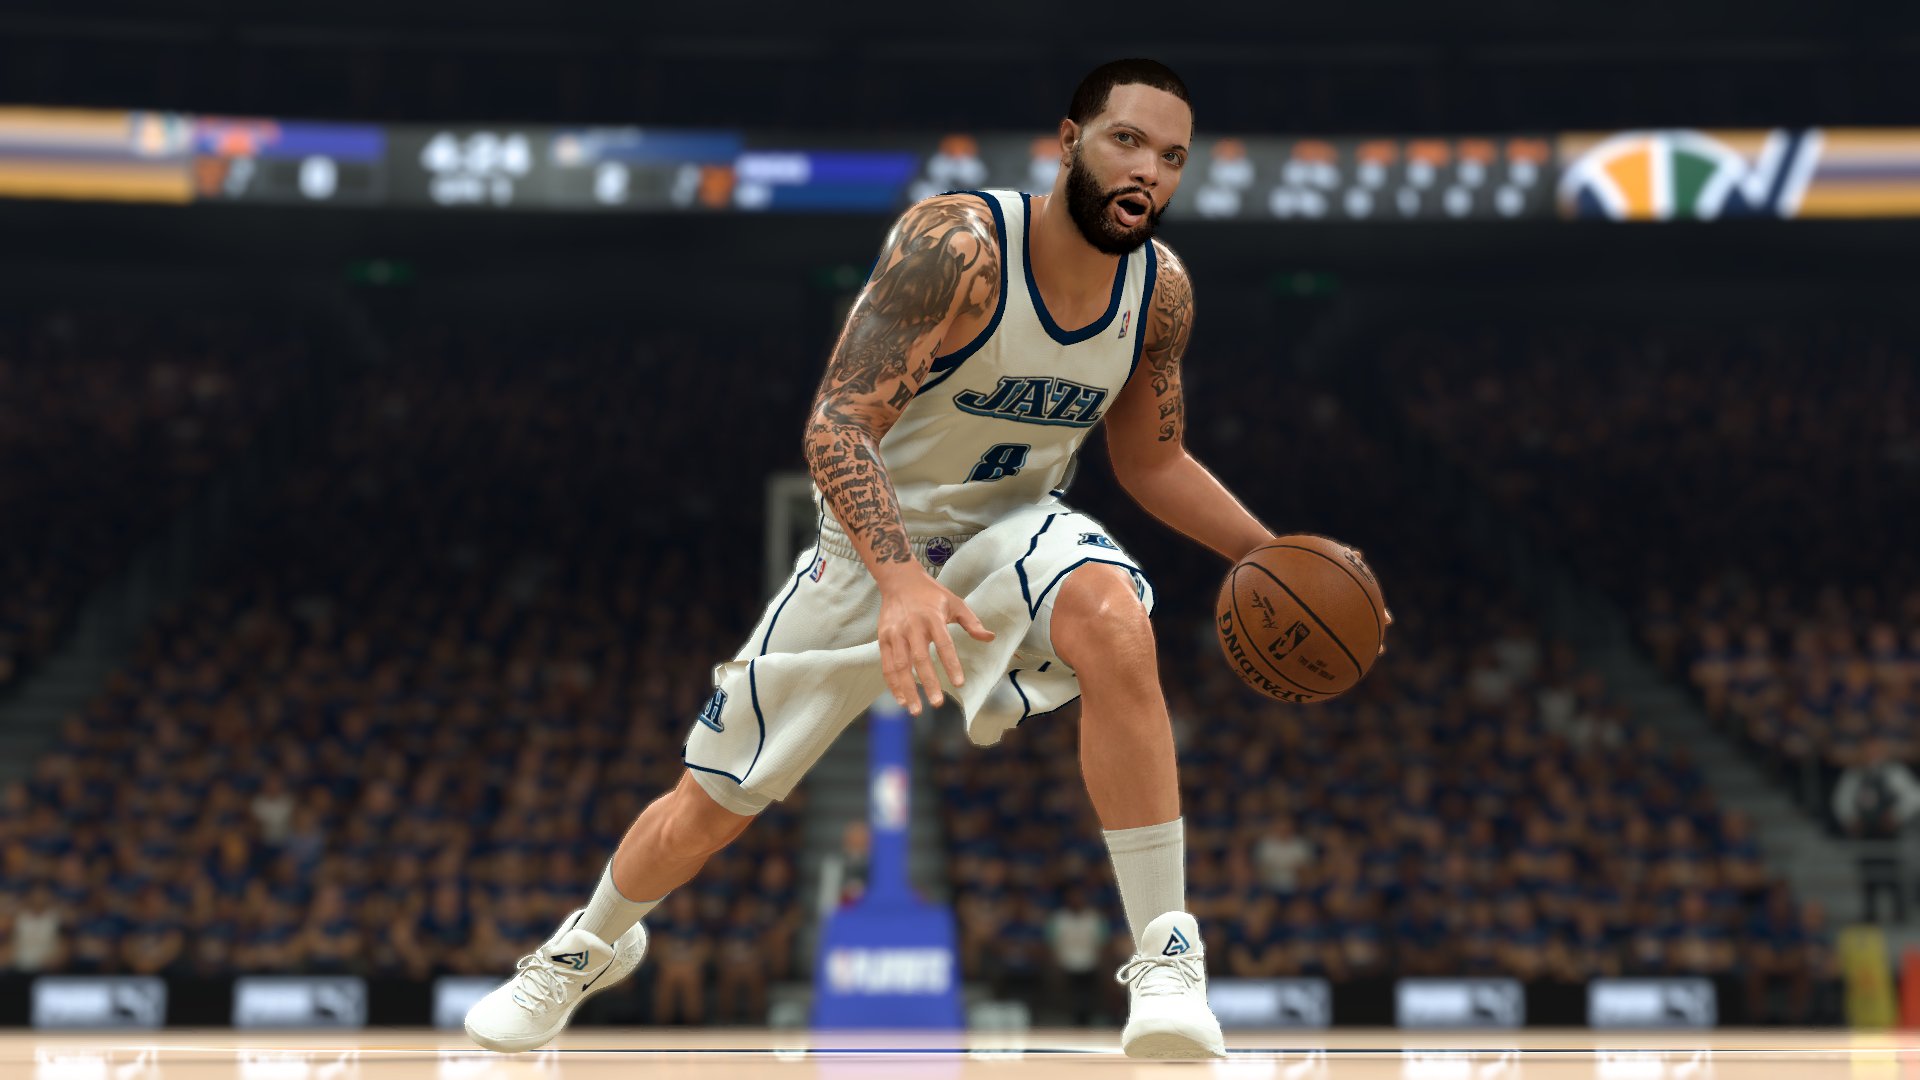 NBA 2K Williams is now back